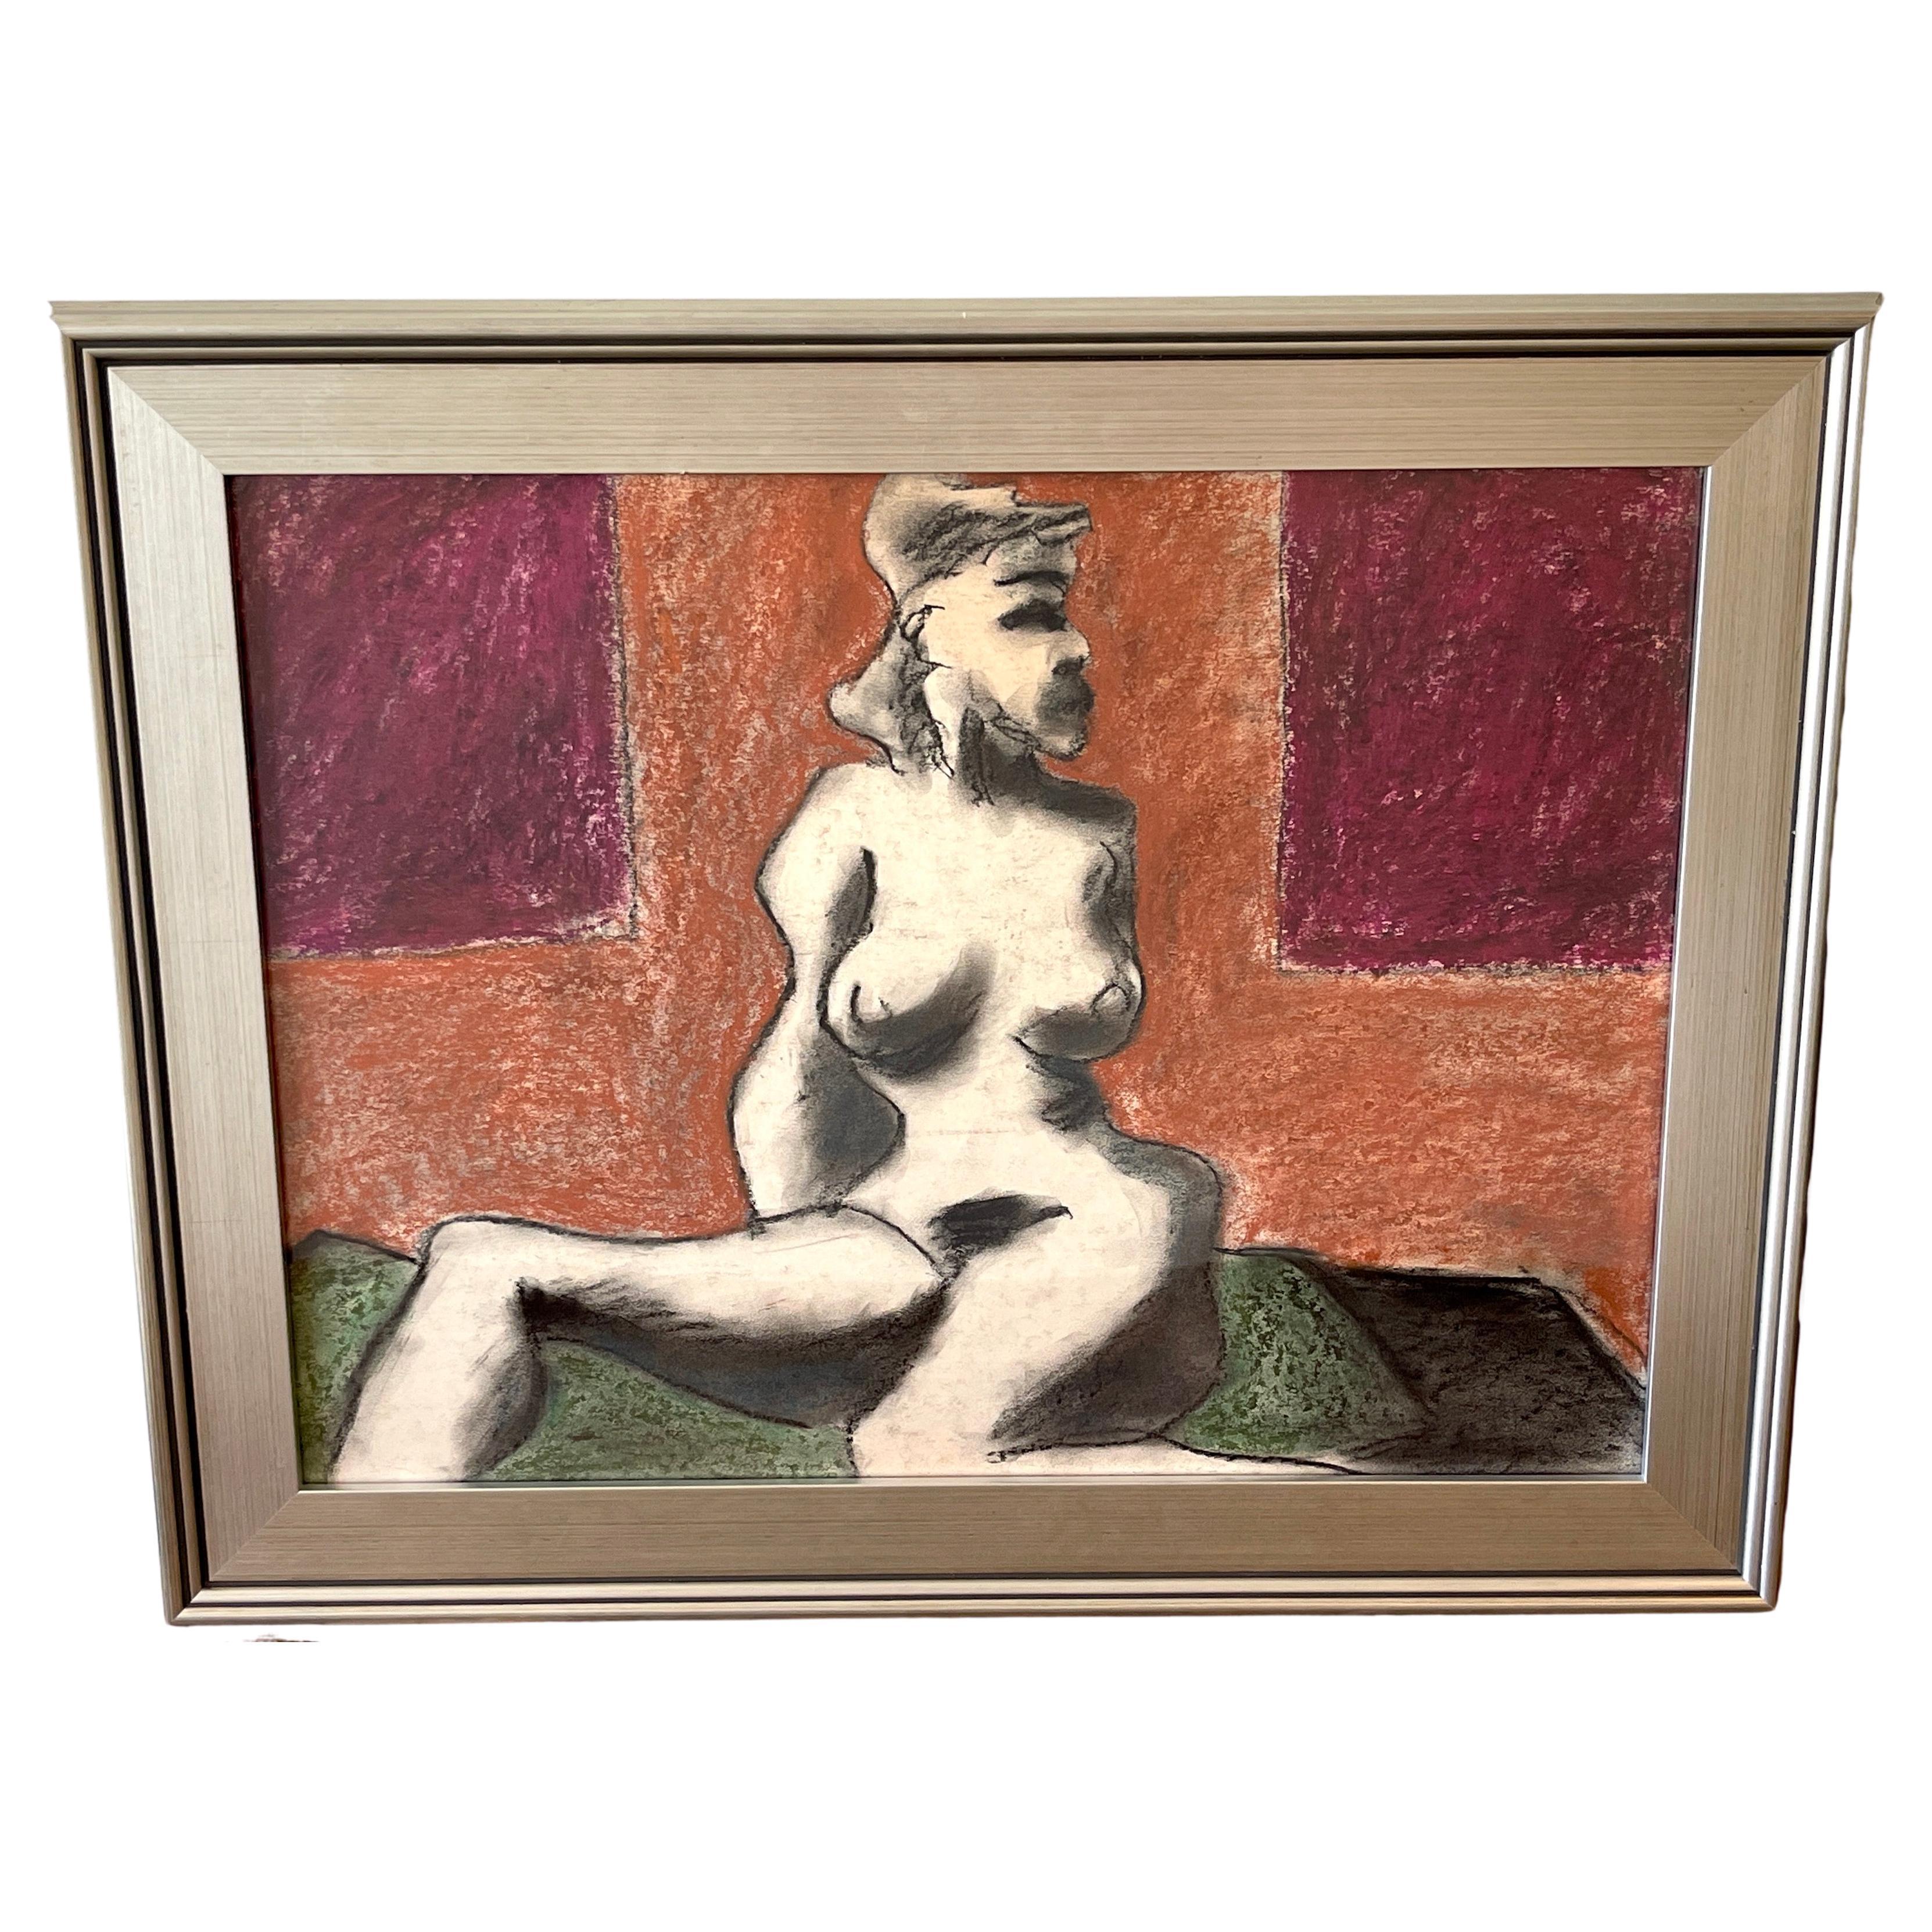 'Seated Female Nude' Oil/Mixed Media on Paper, 1960s by Douglas D. Peden